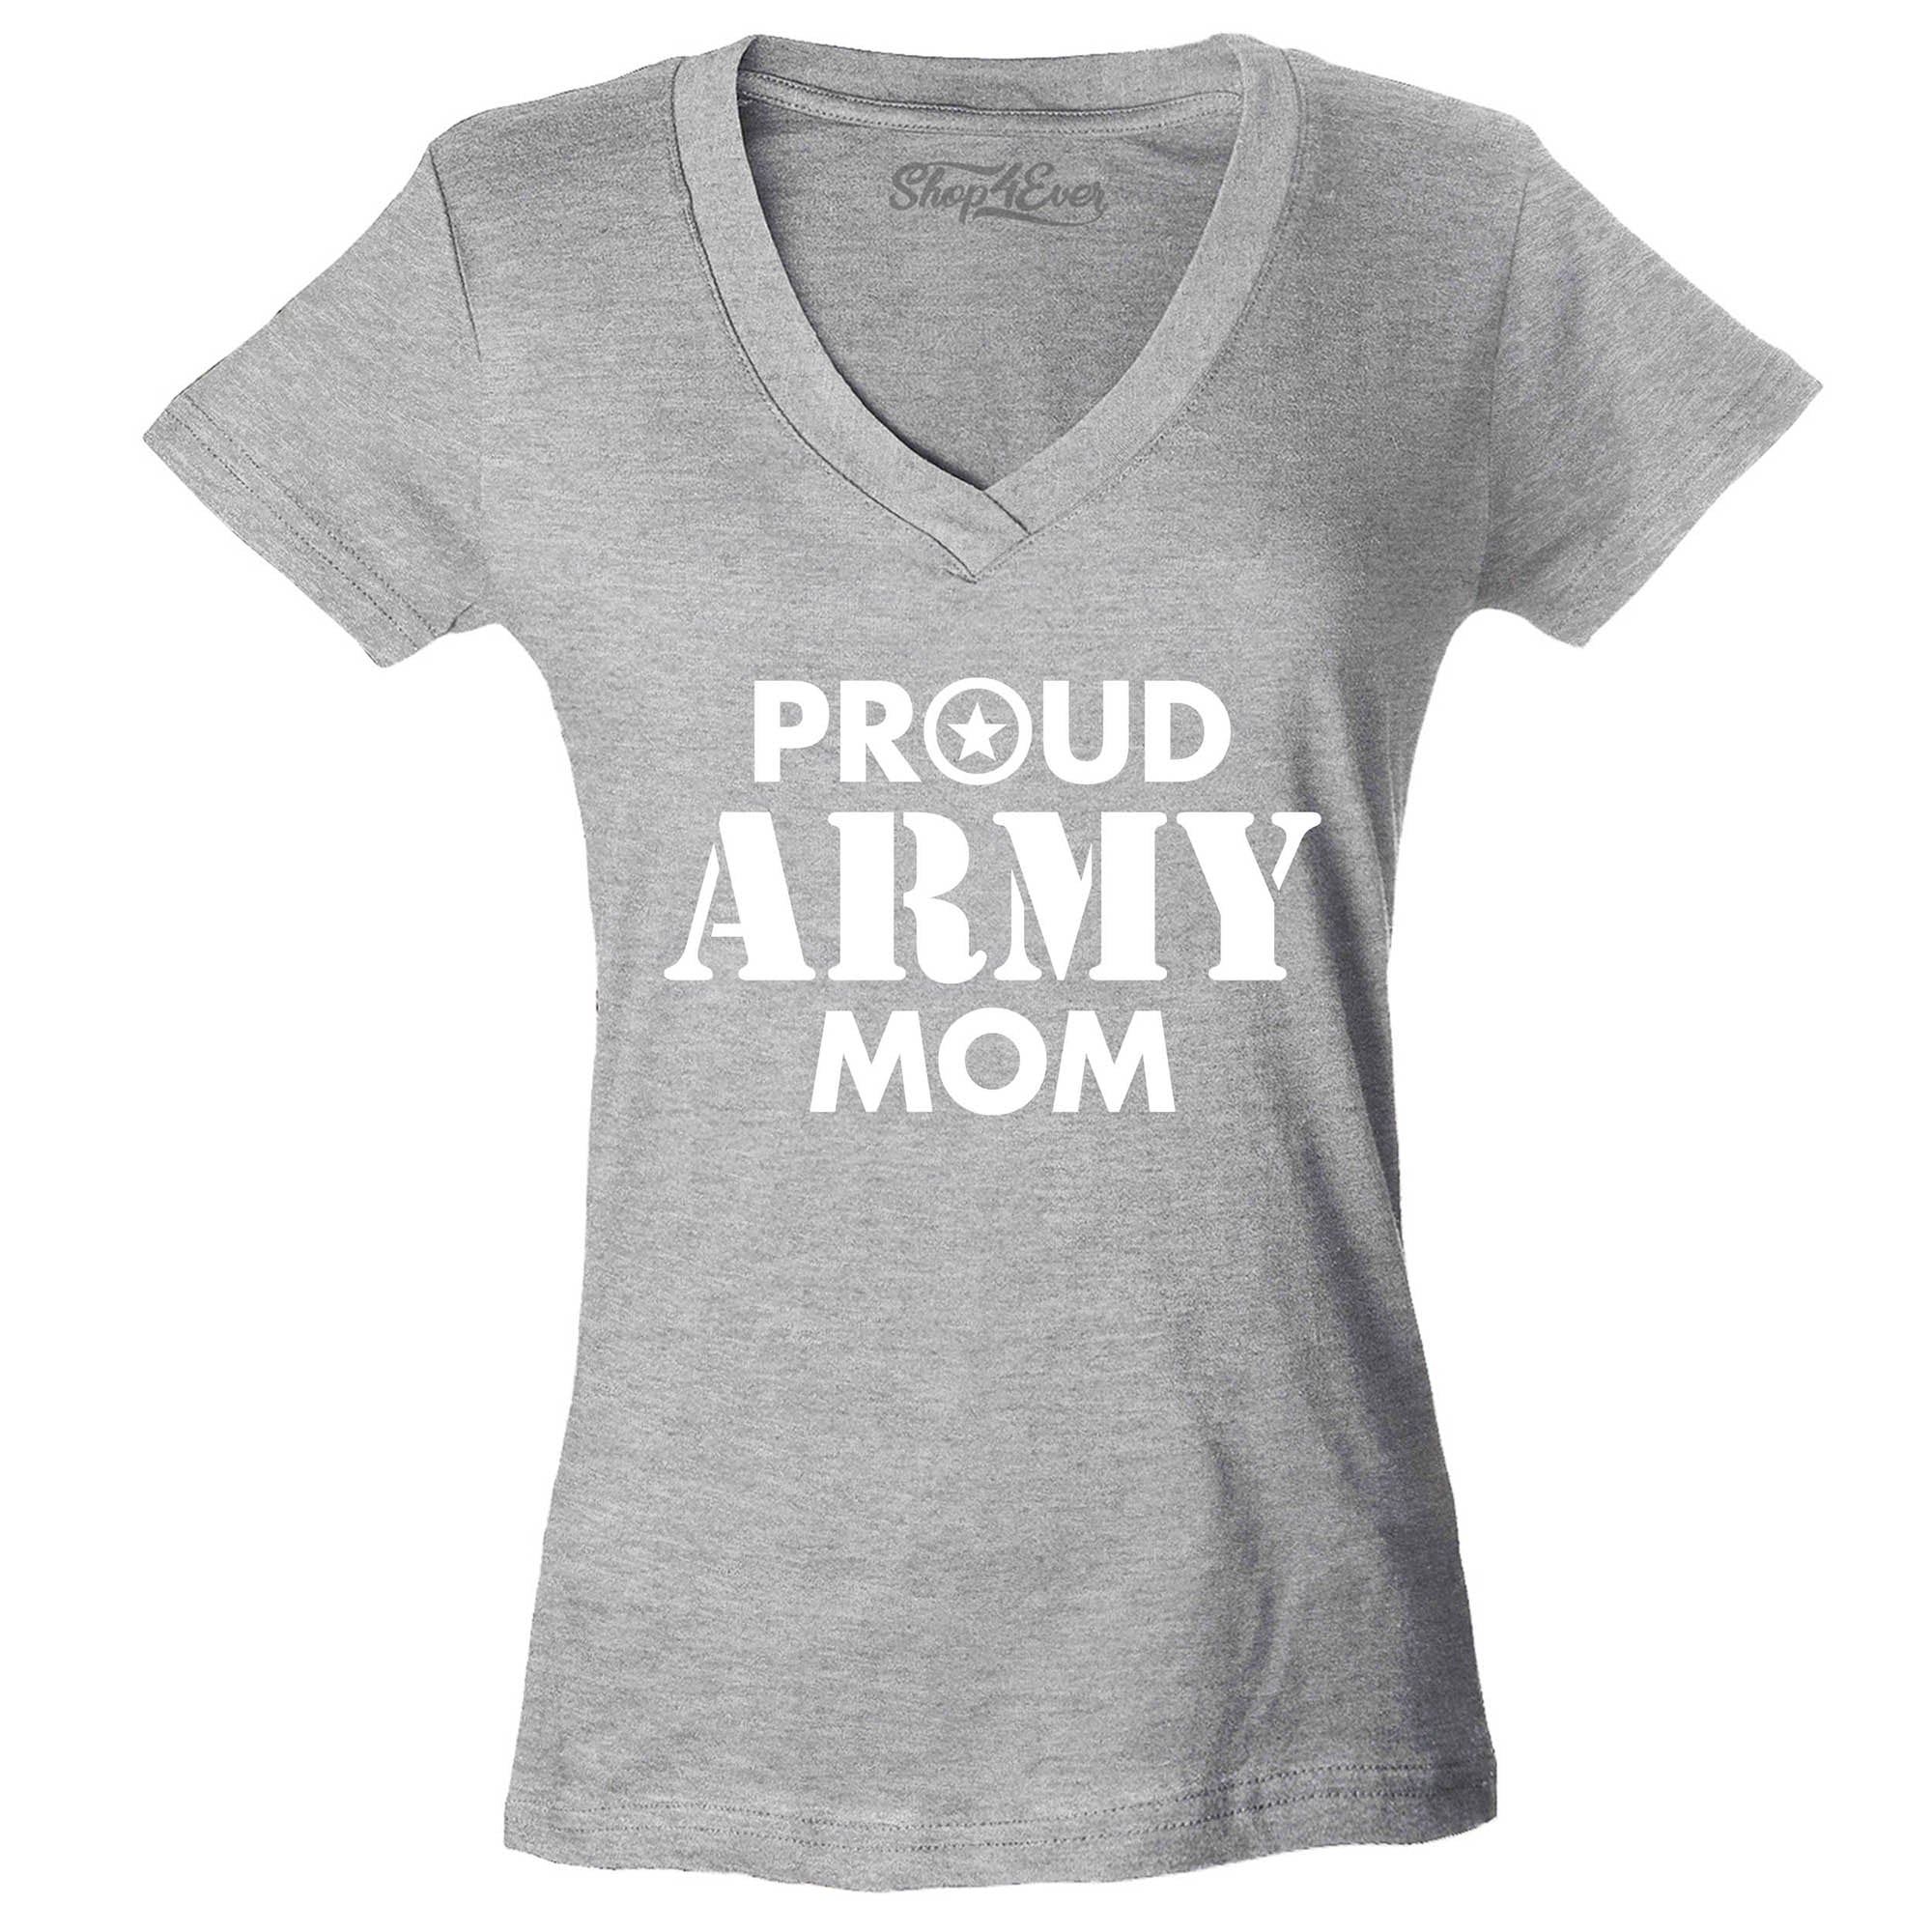 Proud Army Mom Women's V-Neck T-Shirt Slim Fit